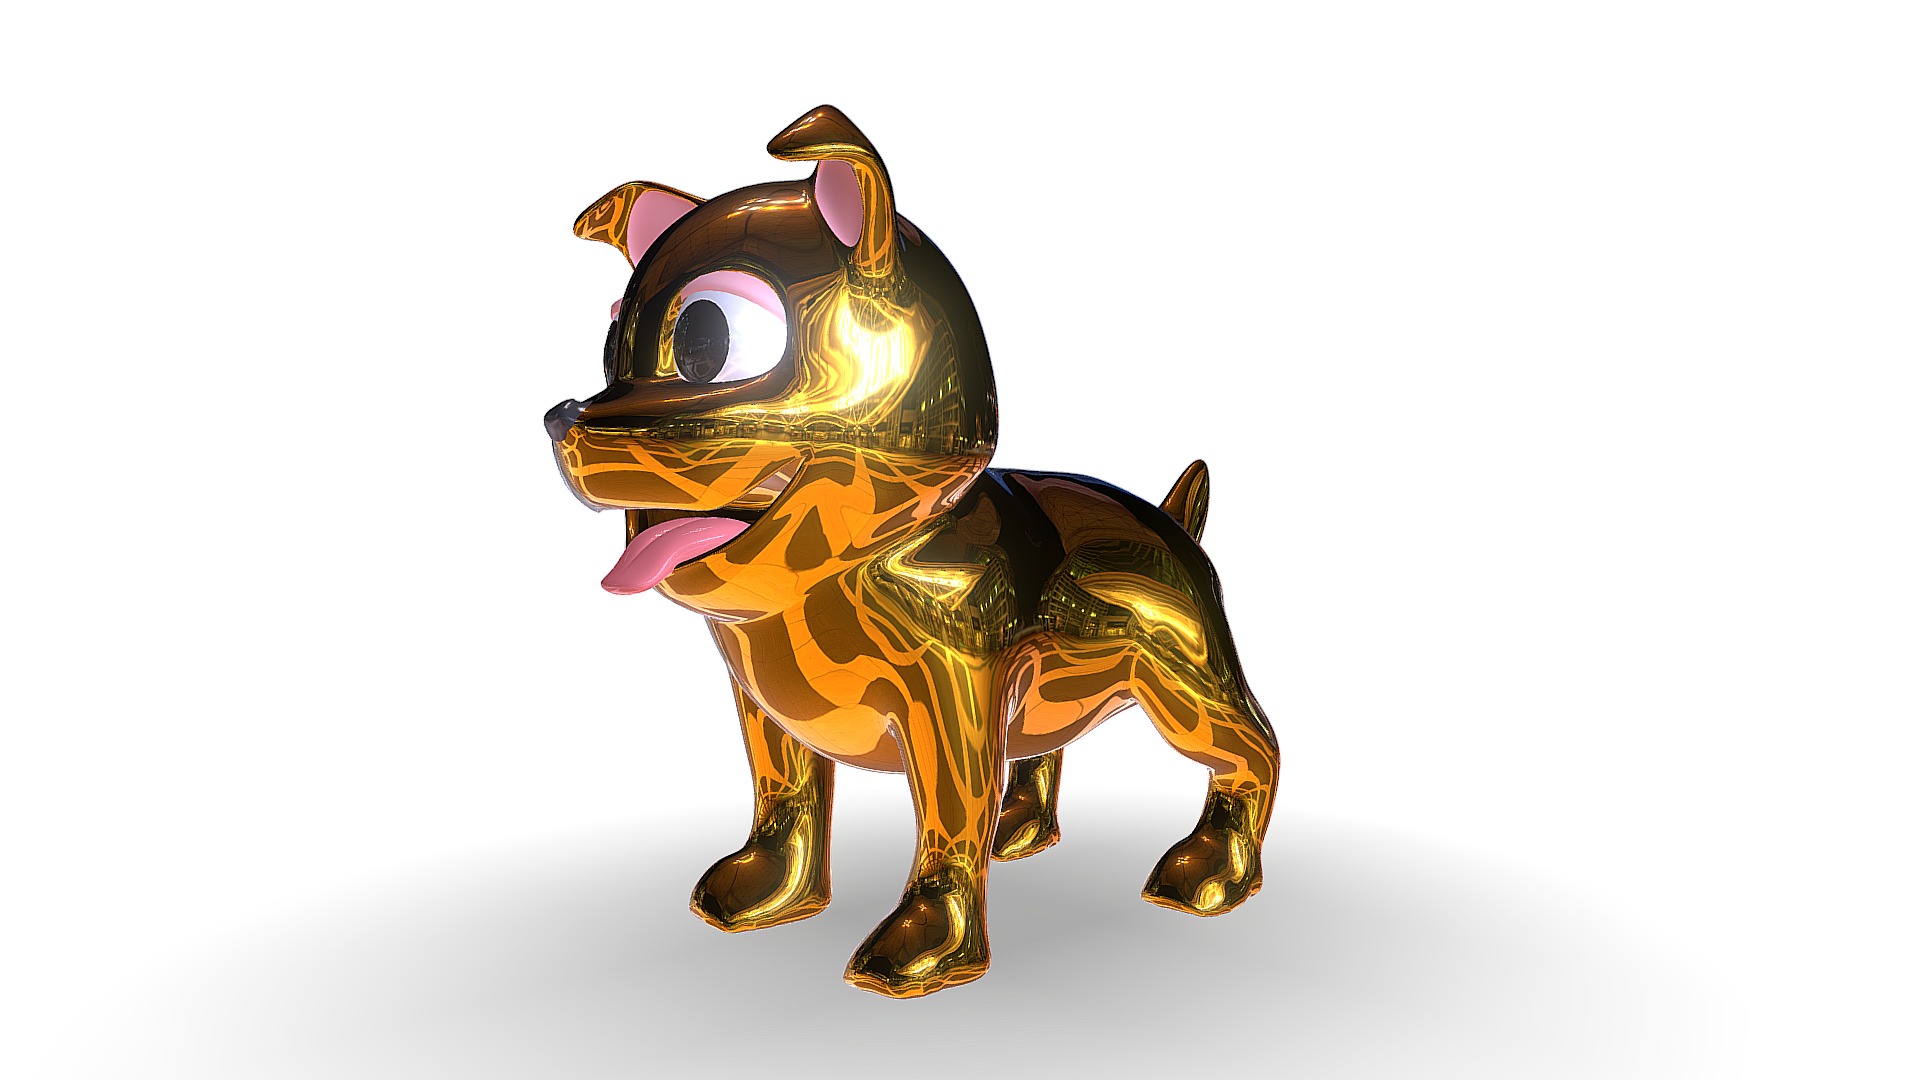 3D model Leff Coons – Sequela - This is a 3D model of the Leff Coons - Sequela. The 3D model is about a yellow and orange toy.